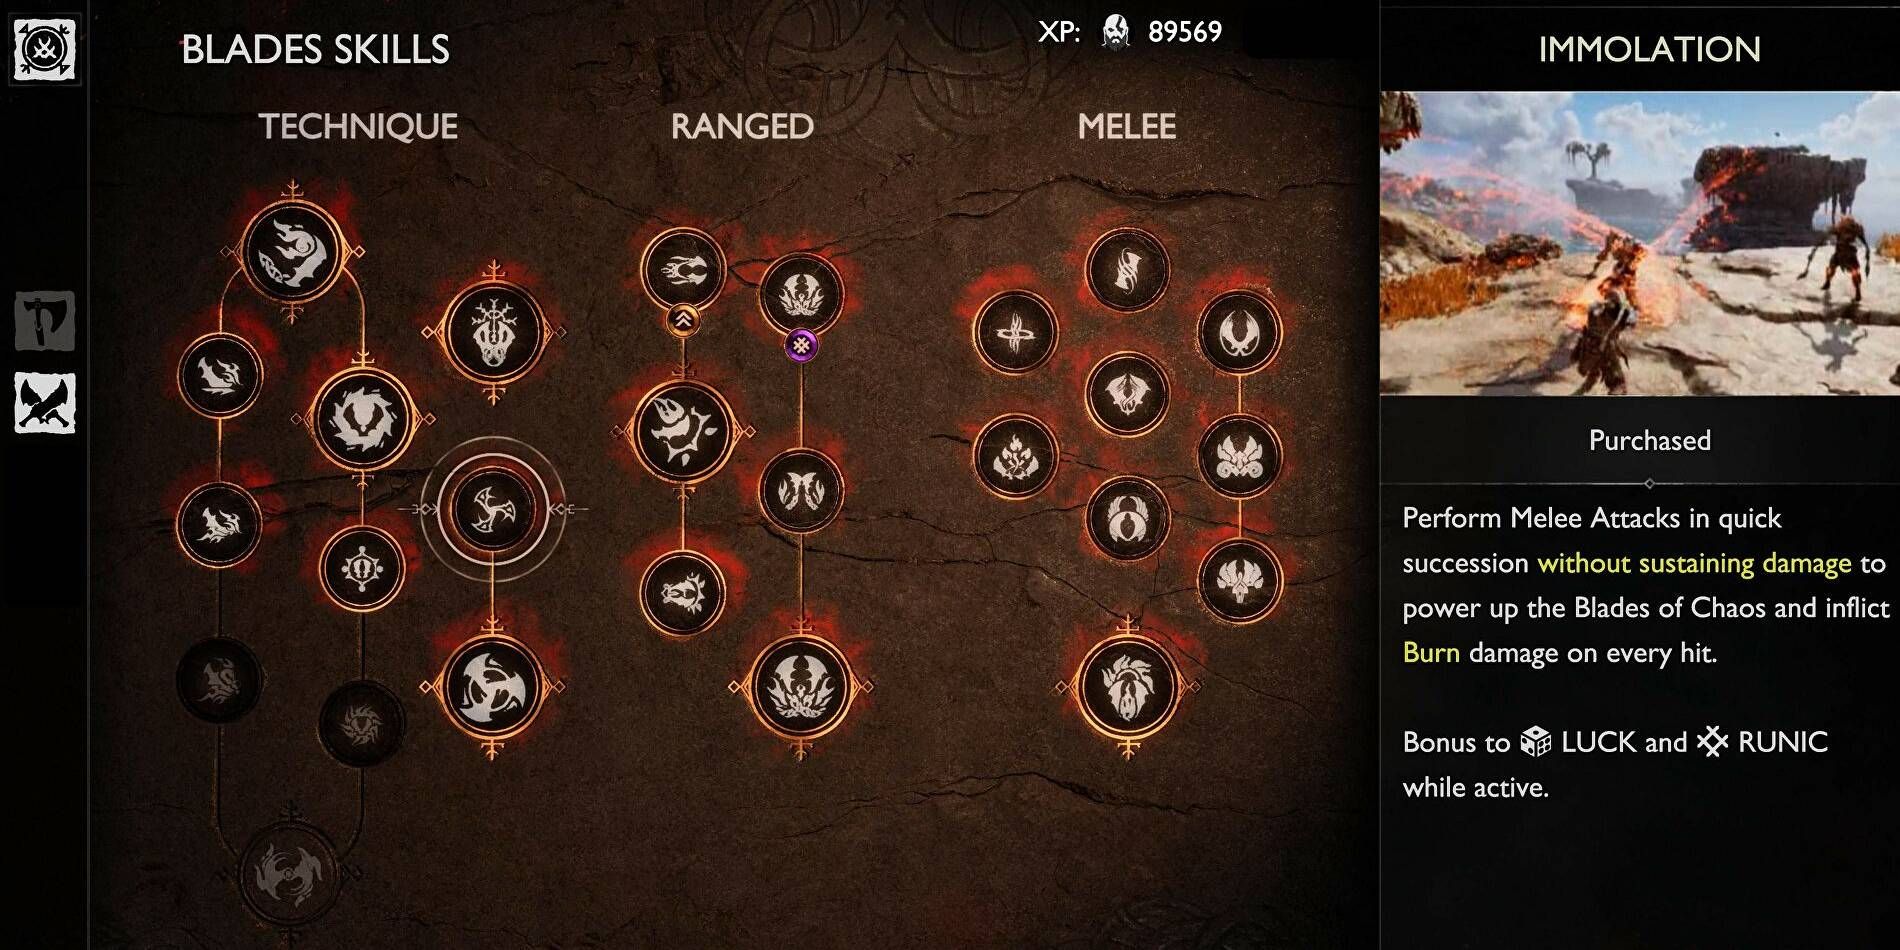 God of War: Ragnarok Blades of Chaos Skill Trees with Immolation Skill Being Highlighted for Early Runic Bonuses